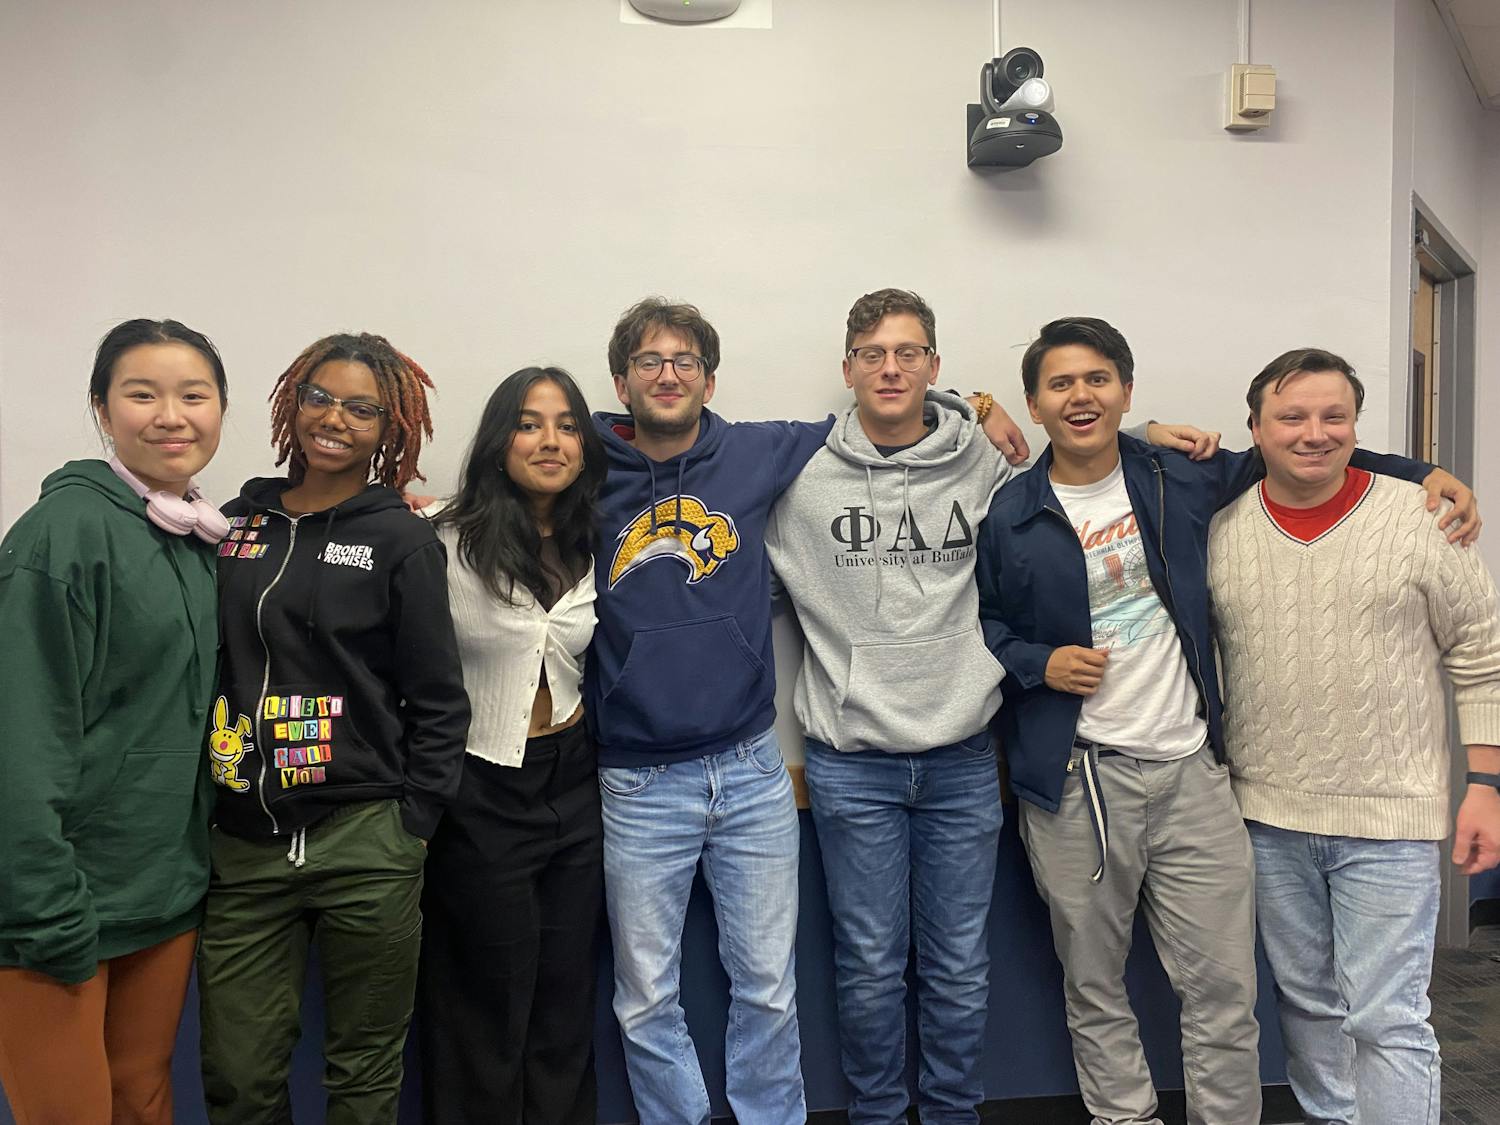 In its first two months of existence, PPE club has hosted discussions about modern morality, pragmatism, capitalism, identity, justice and more.&nbsp;